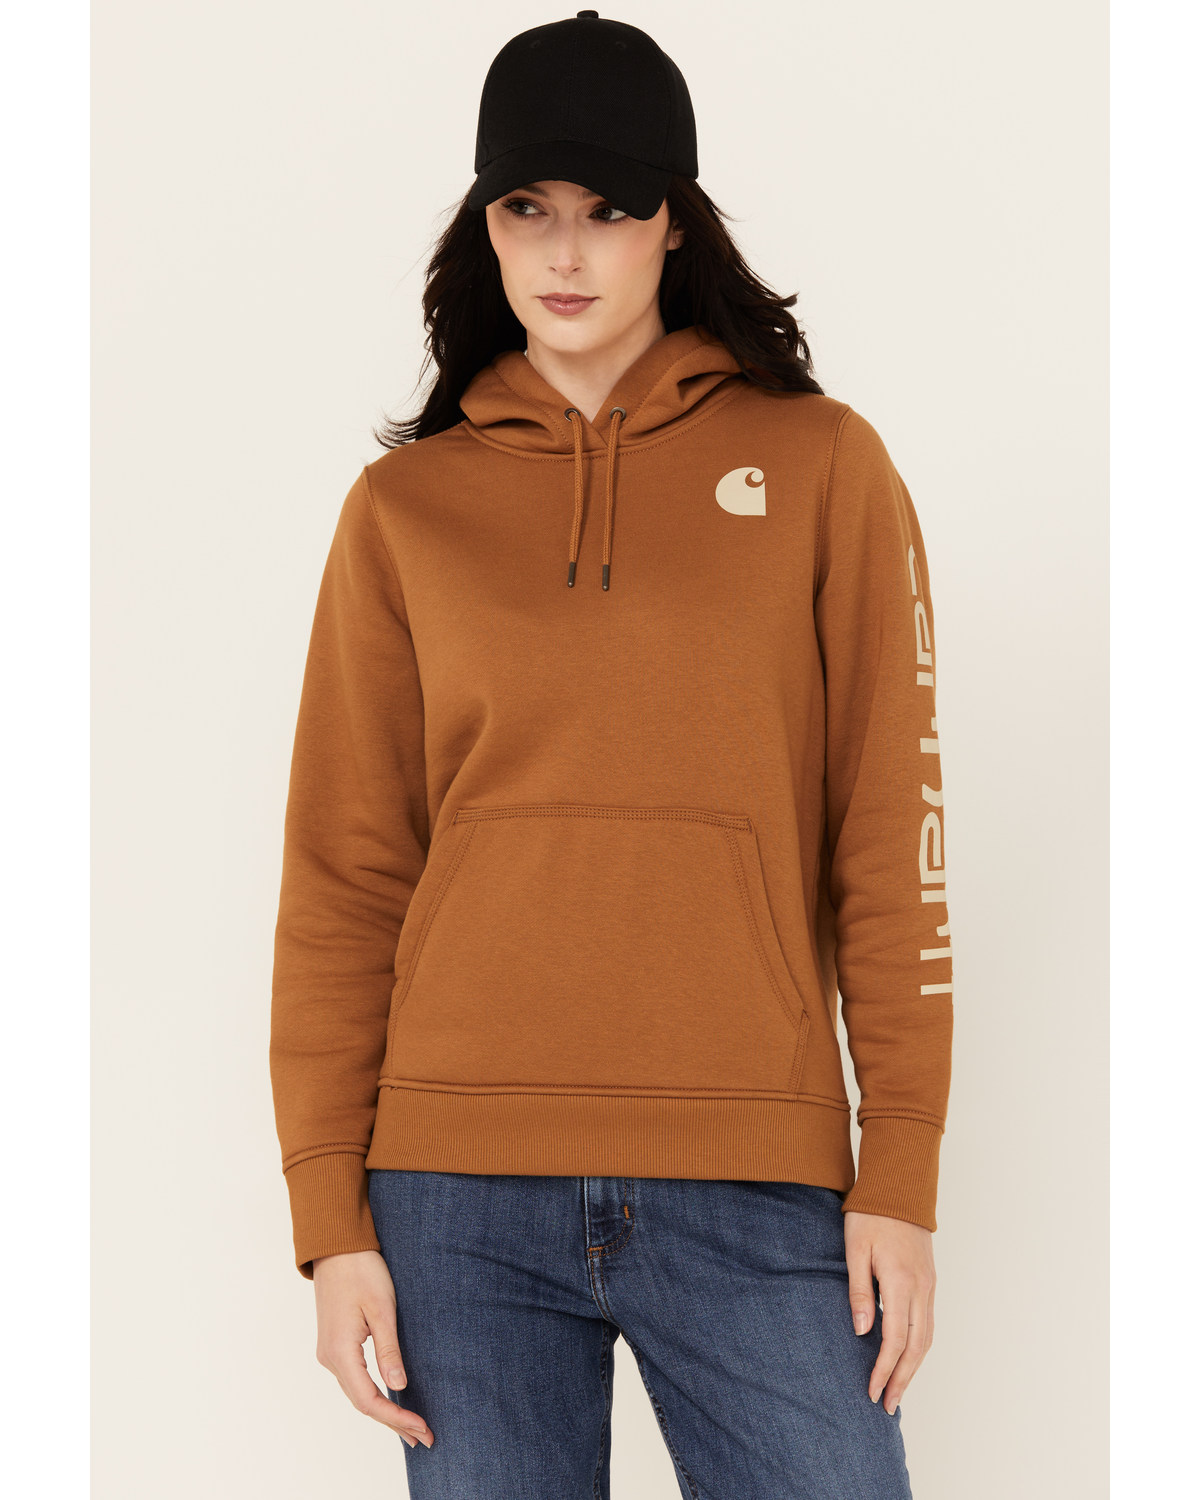 Carhartt Women's Relaxed Fit Midweight Sleeve Graphic Sweatshirt